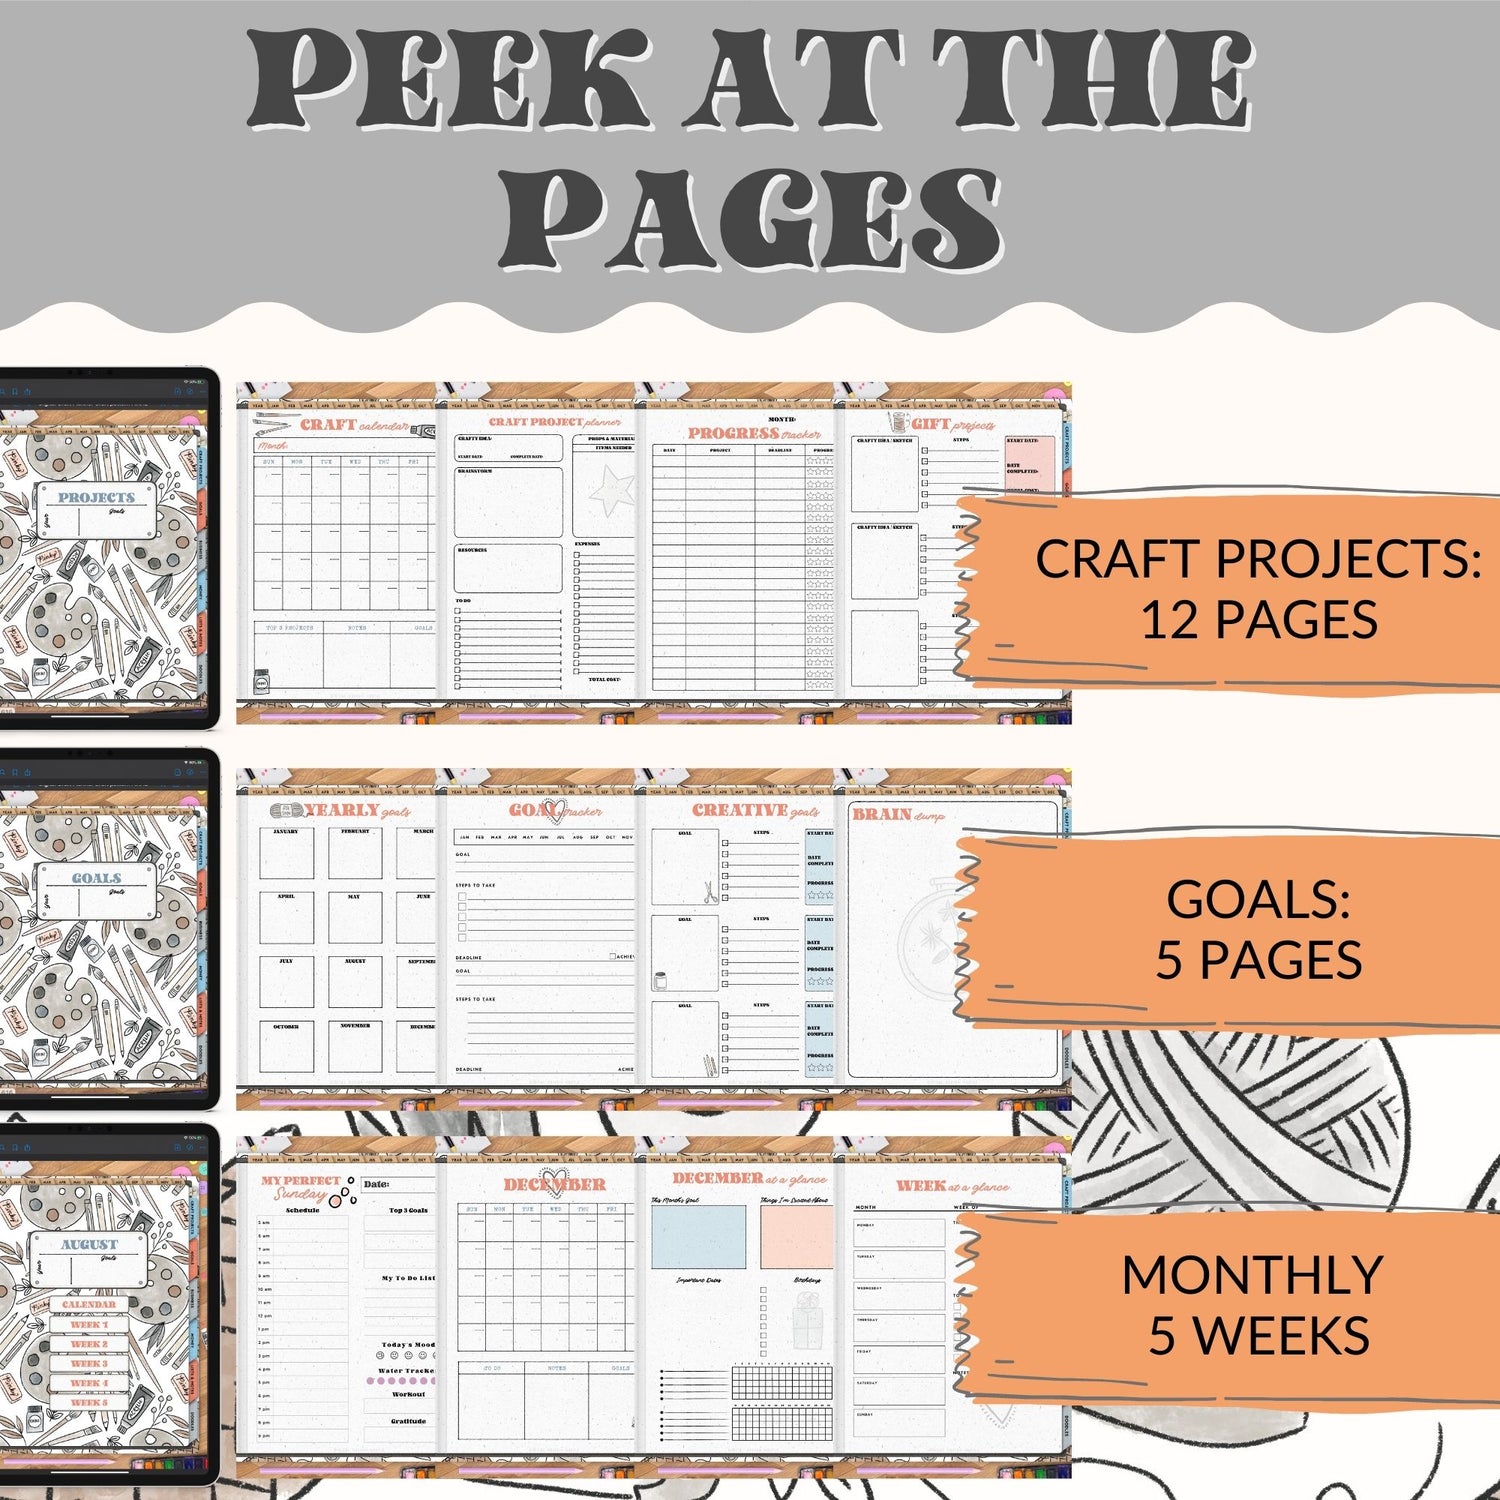 Plan out all of your craft projects quickly and efficiently with this 615-page Digital Craft Planner.  A digital craft planner helps in planning and organizing craft projects. The main purpose of a craft planner is to make sure that all the necessary steps and materials are identified in advance so that the project can be completed successfully and efficiently. 